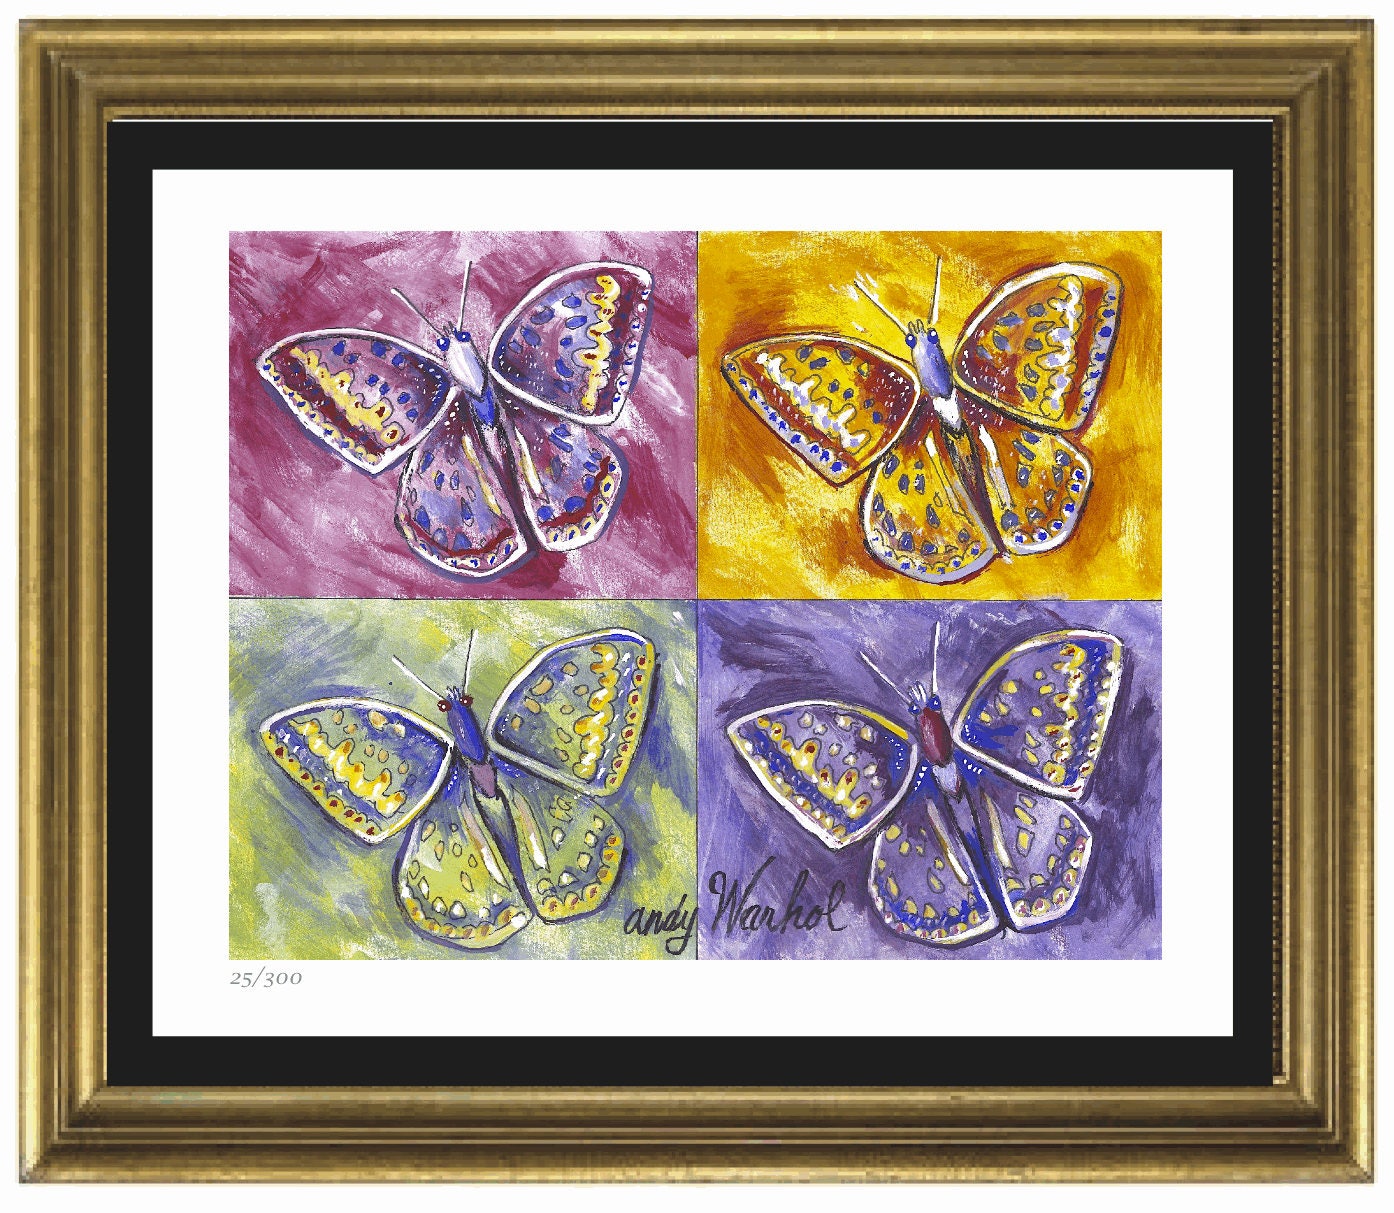 Andy Warhol Butterflies Limited Edition Lithograph Print, Plate-Signed & Hand-Numbered "Butterflies" | Unframed"